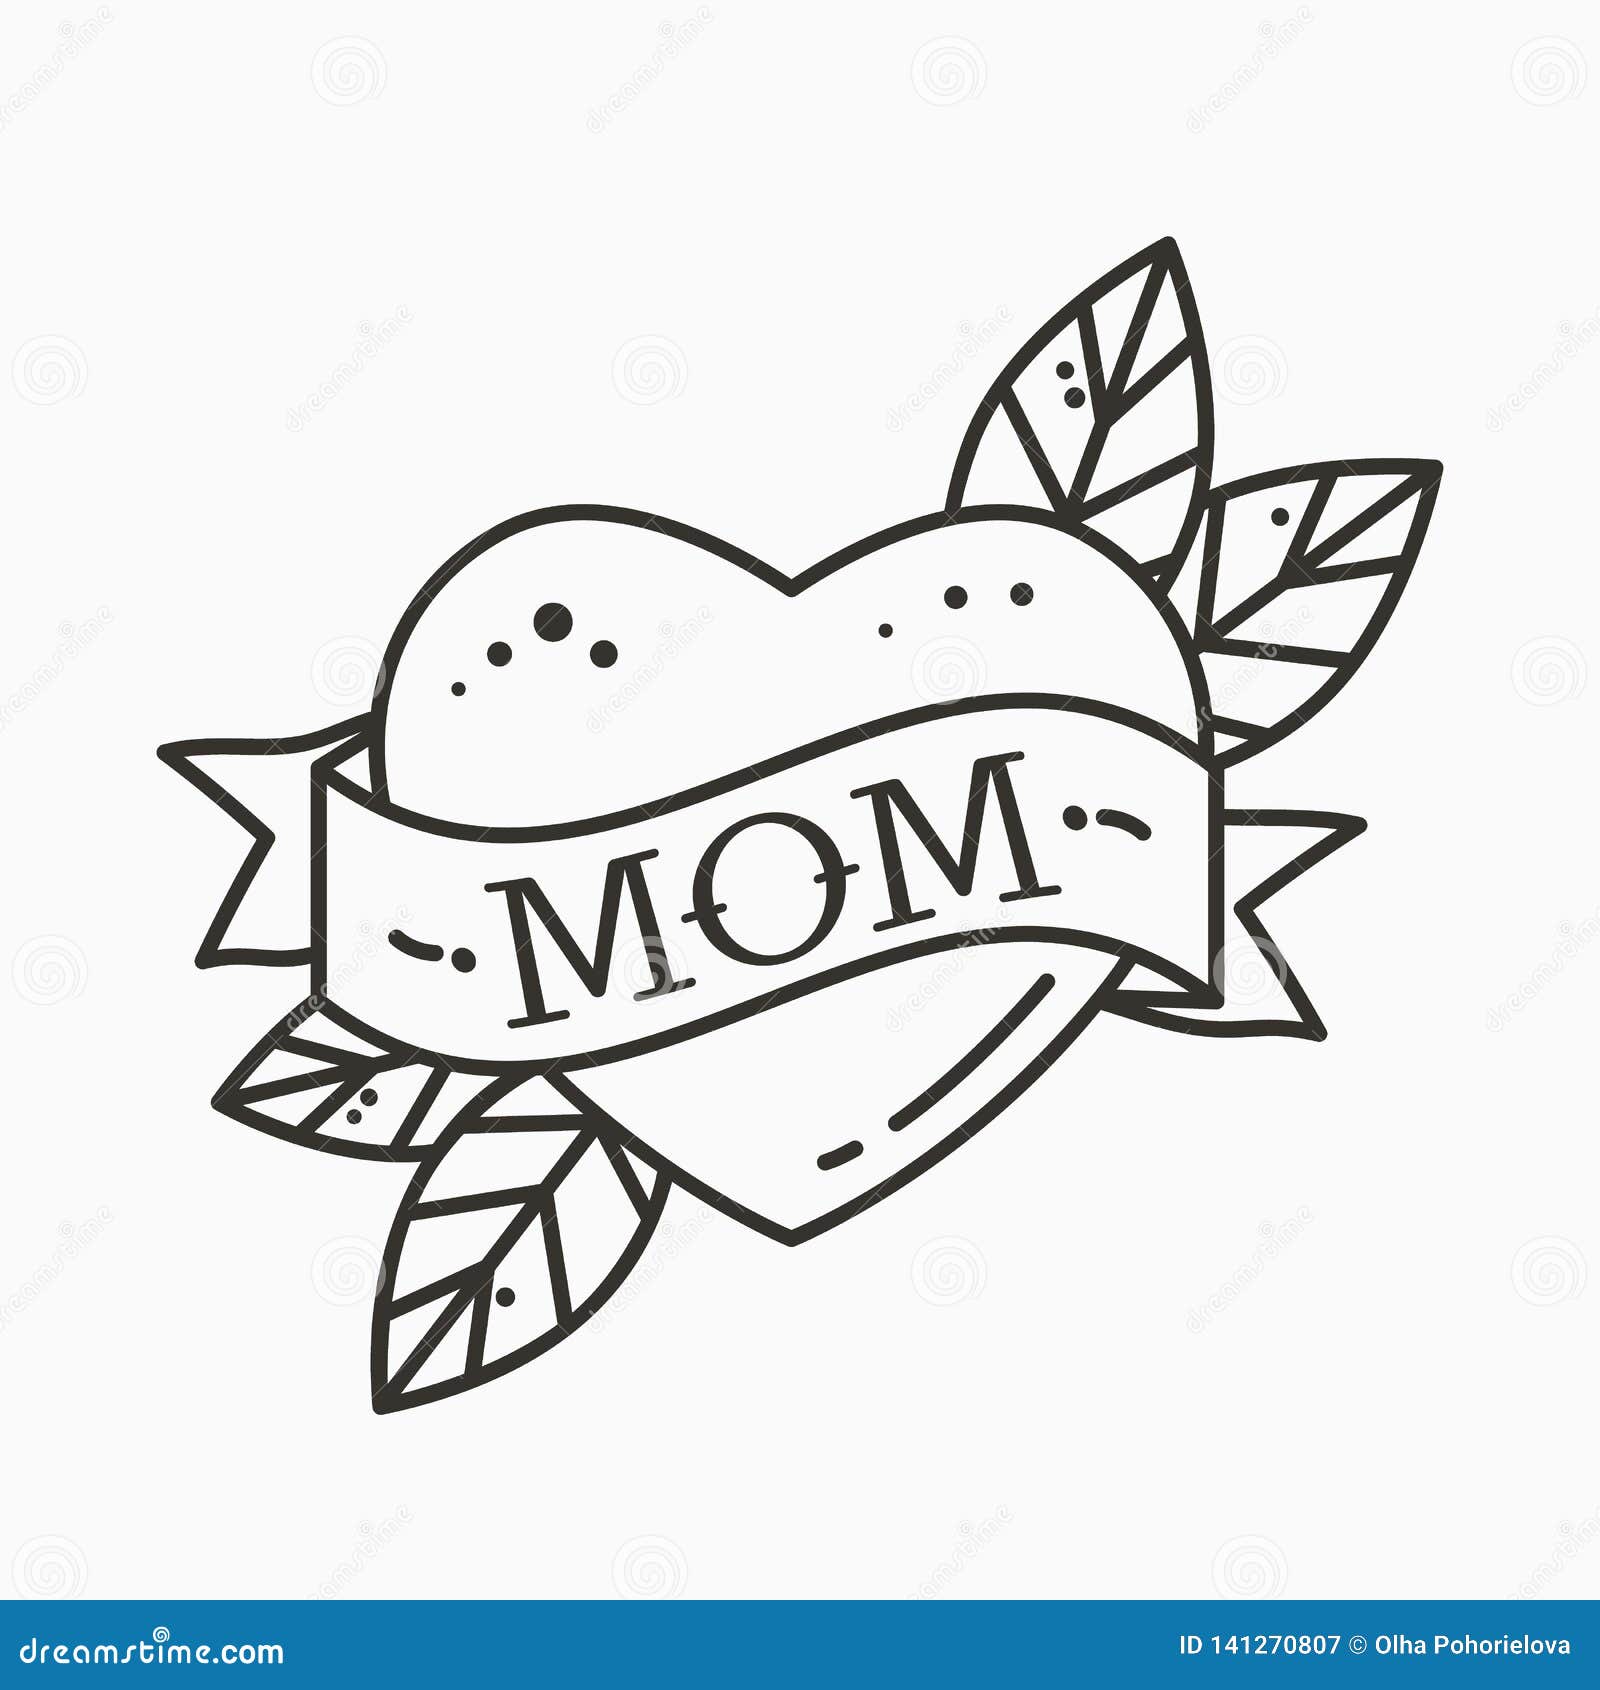 Mom Tattoo Stock Photos Pictures  RoyaltyFree Images  iStock